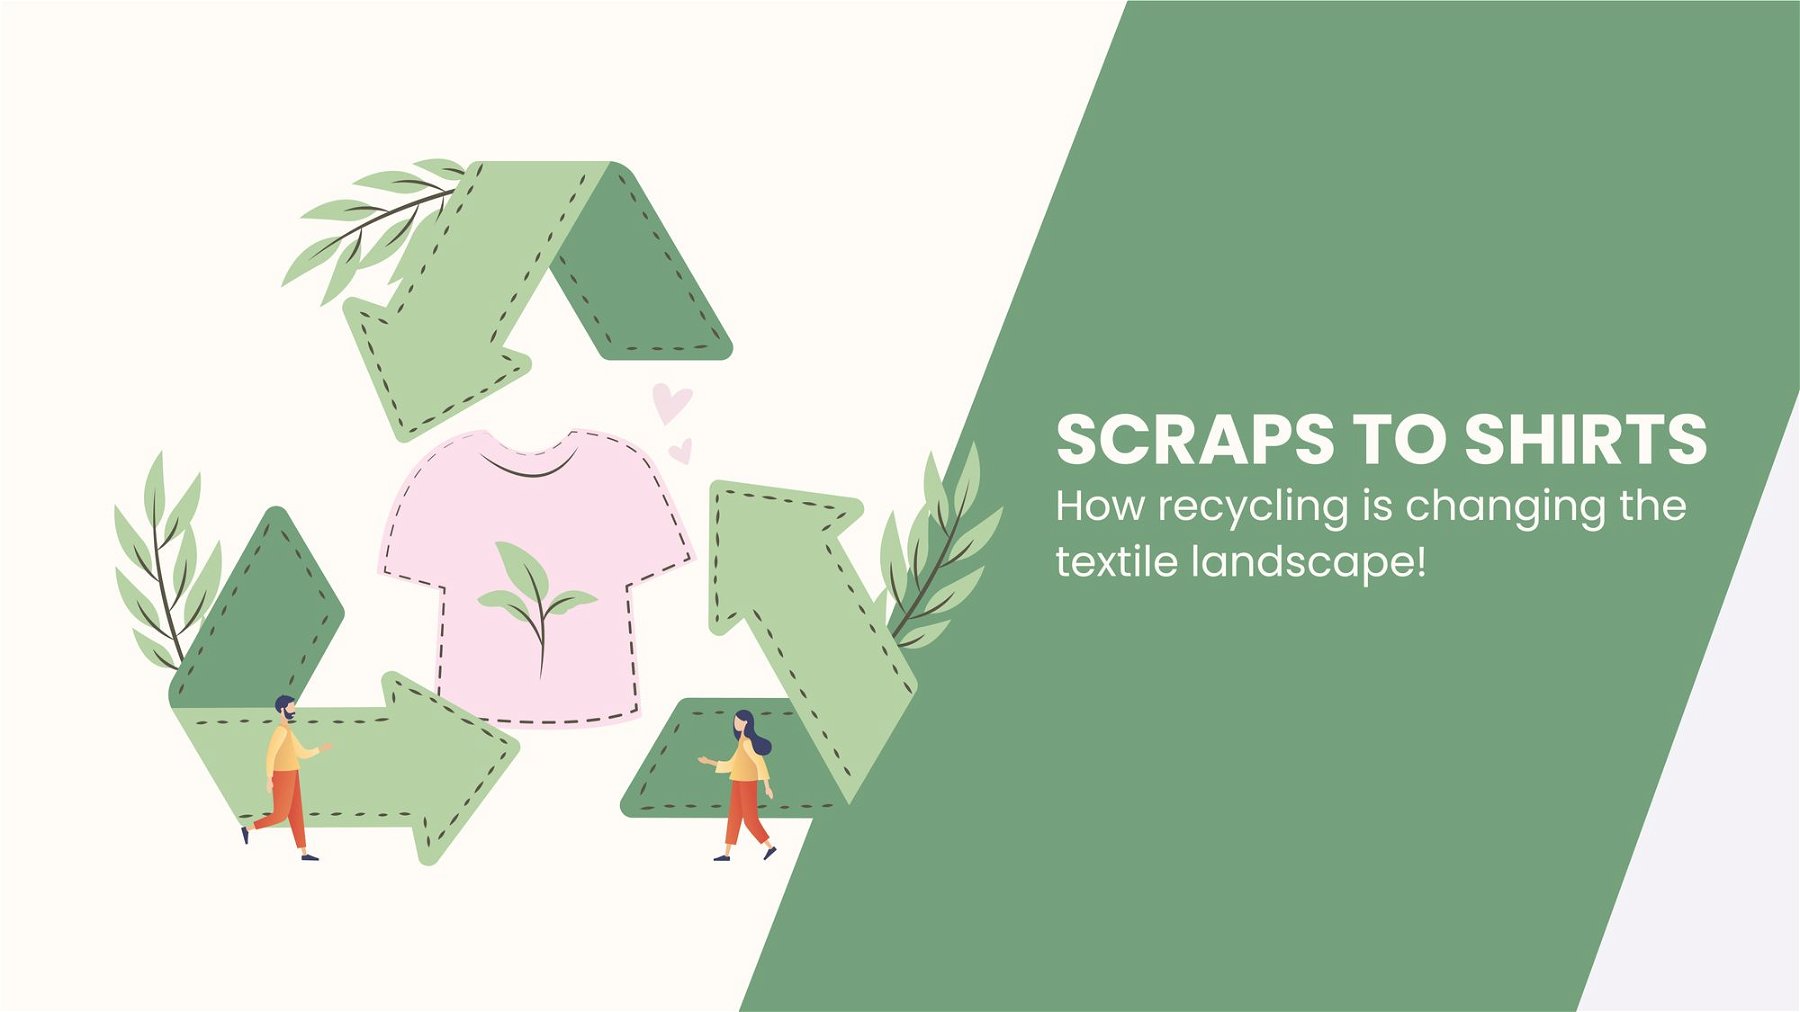 Scraps to shirts: How recycling is changing the textile landscape!